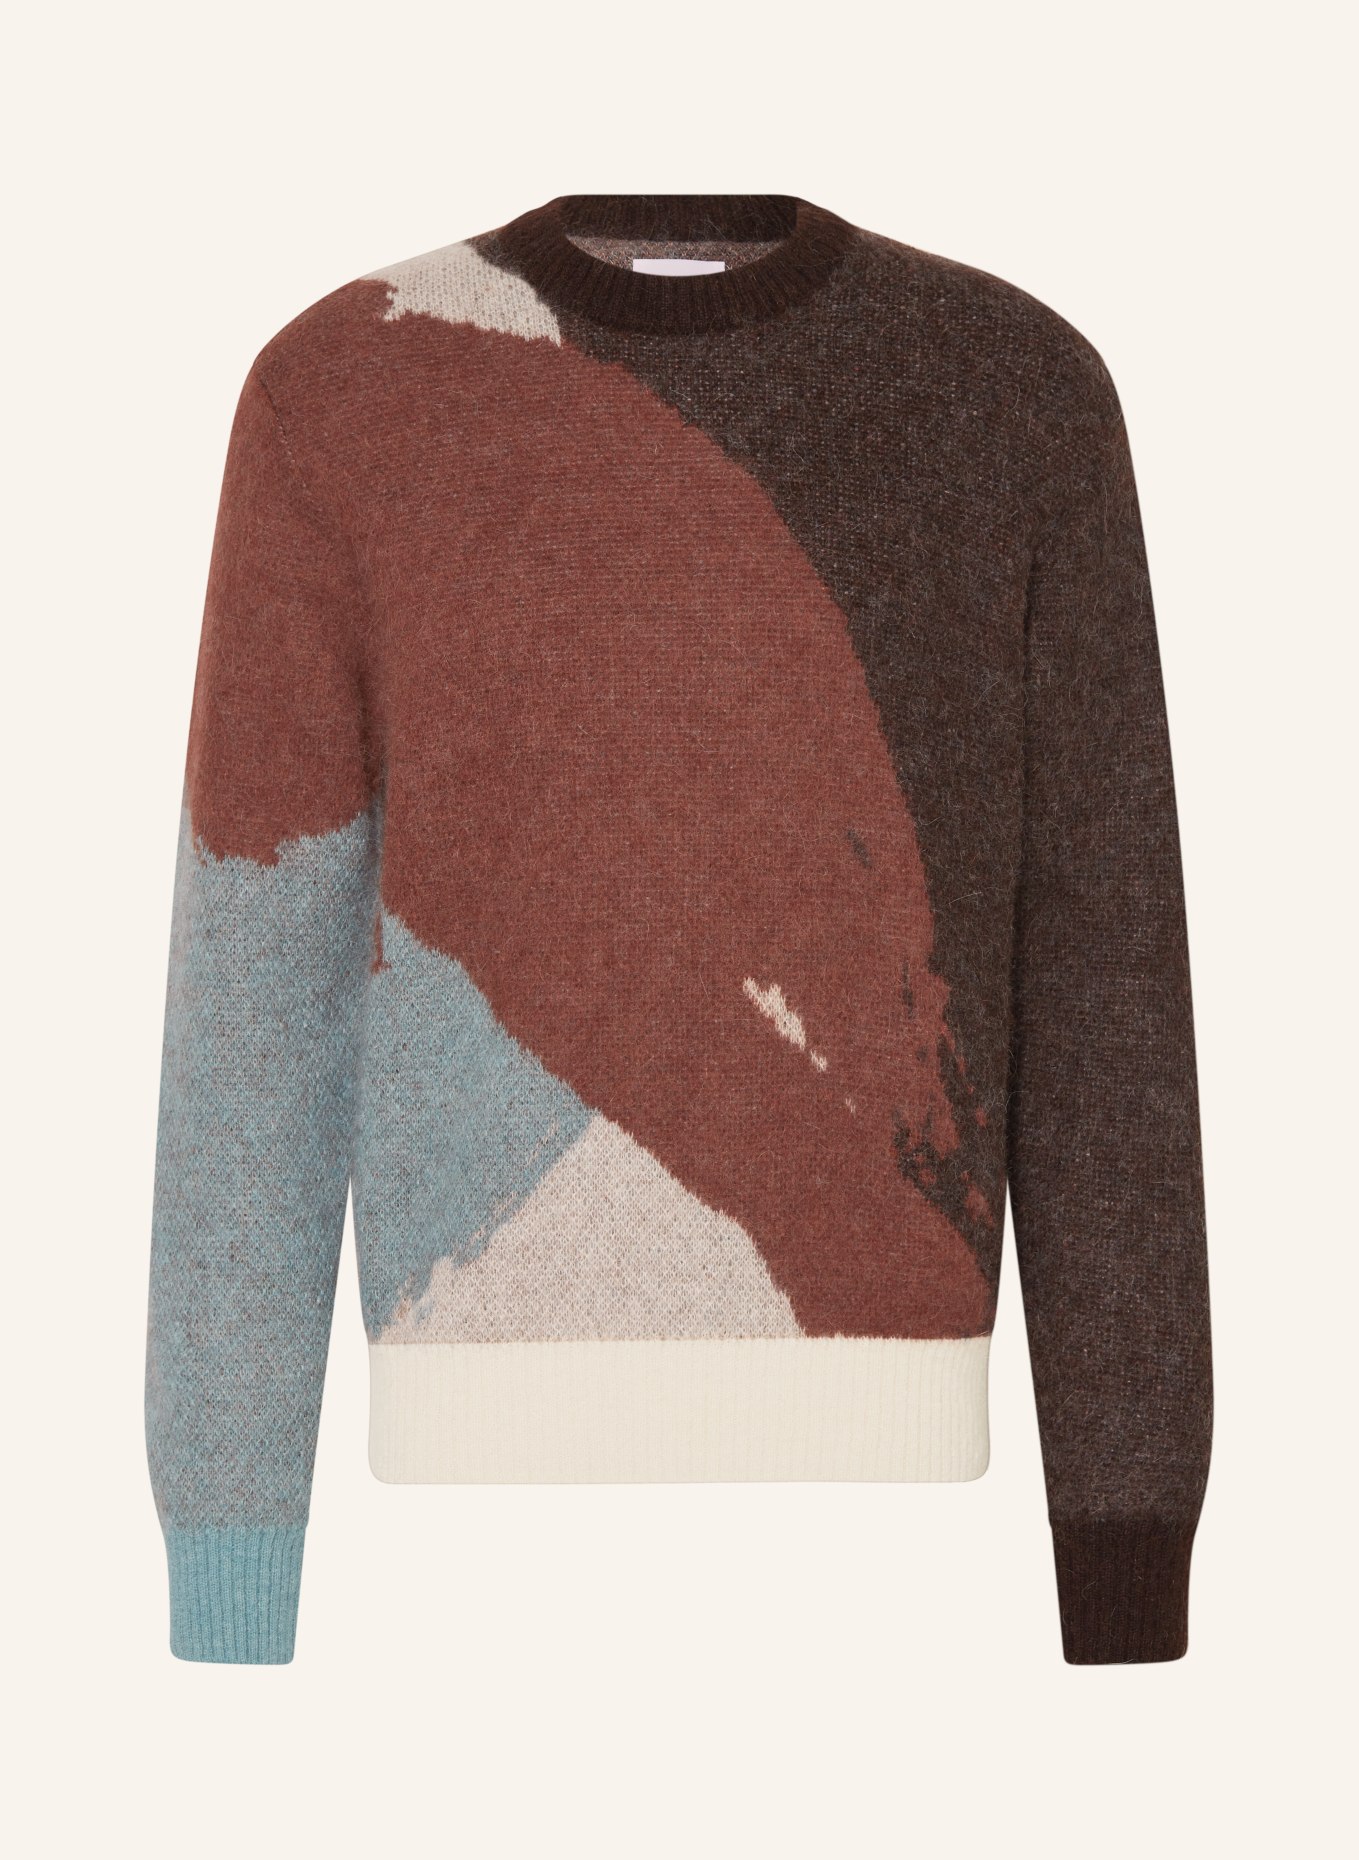 NORSE PROJECTS Sweater ARLID with alpaca and mohair, Color: DARK BROWN/ BEIGE/ MINT (Image 1)